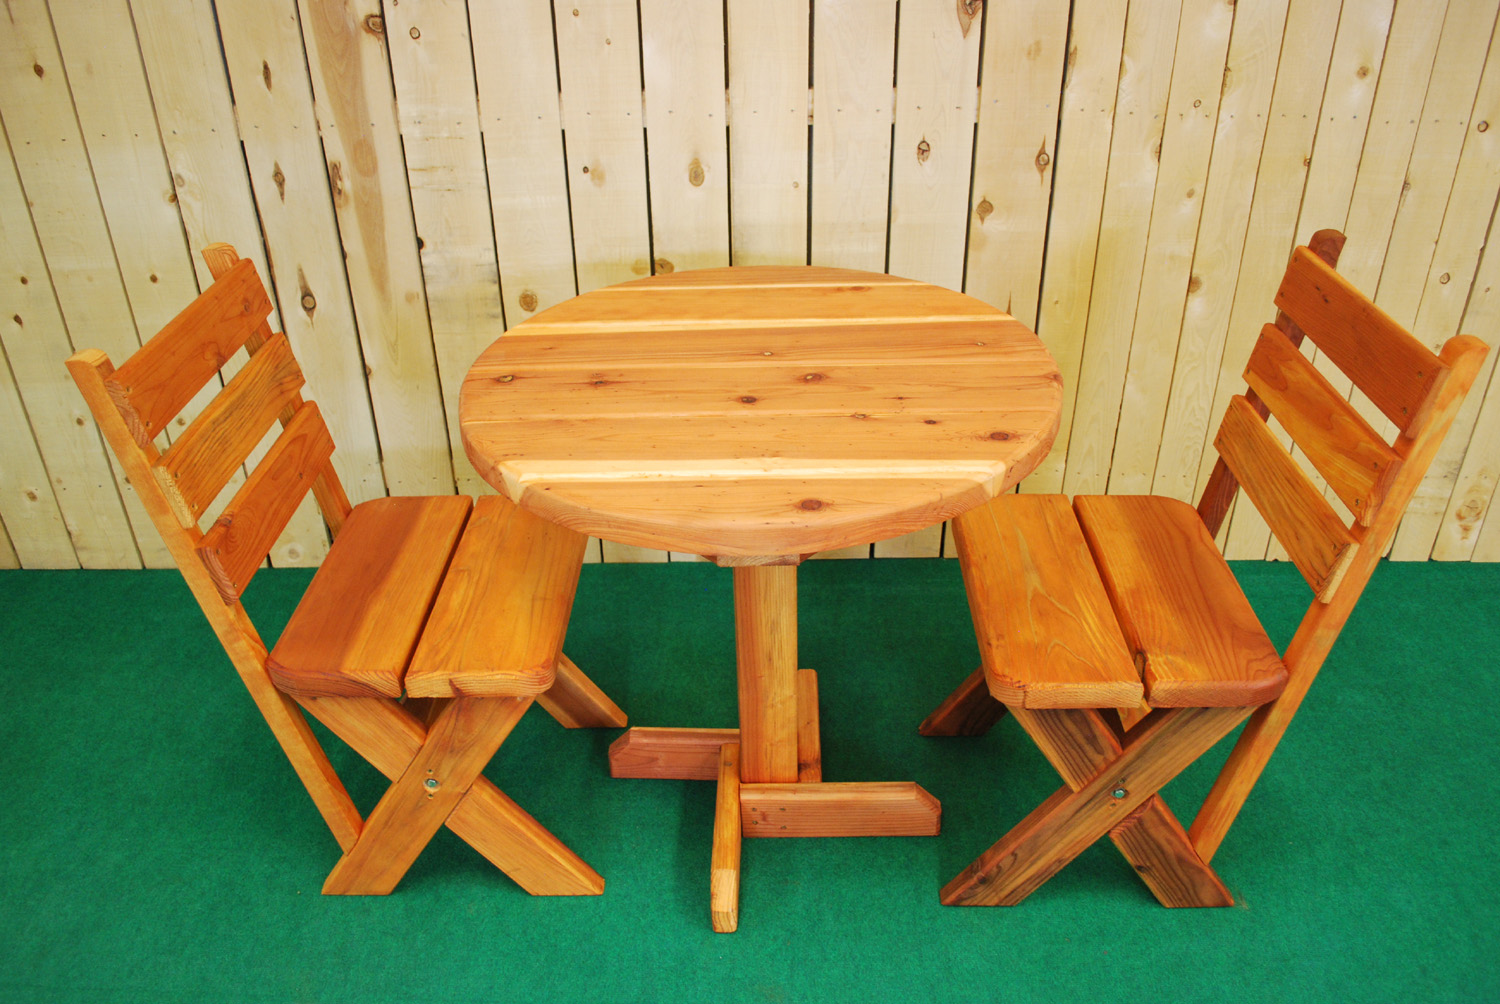 30" round redwood picnic table